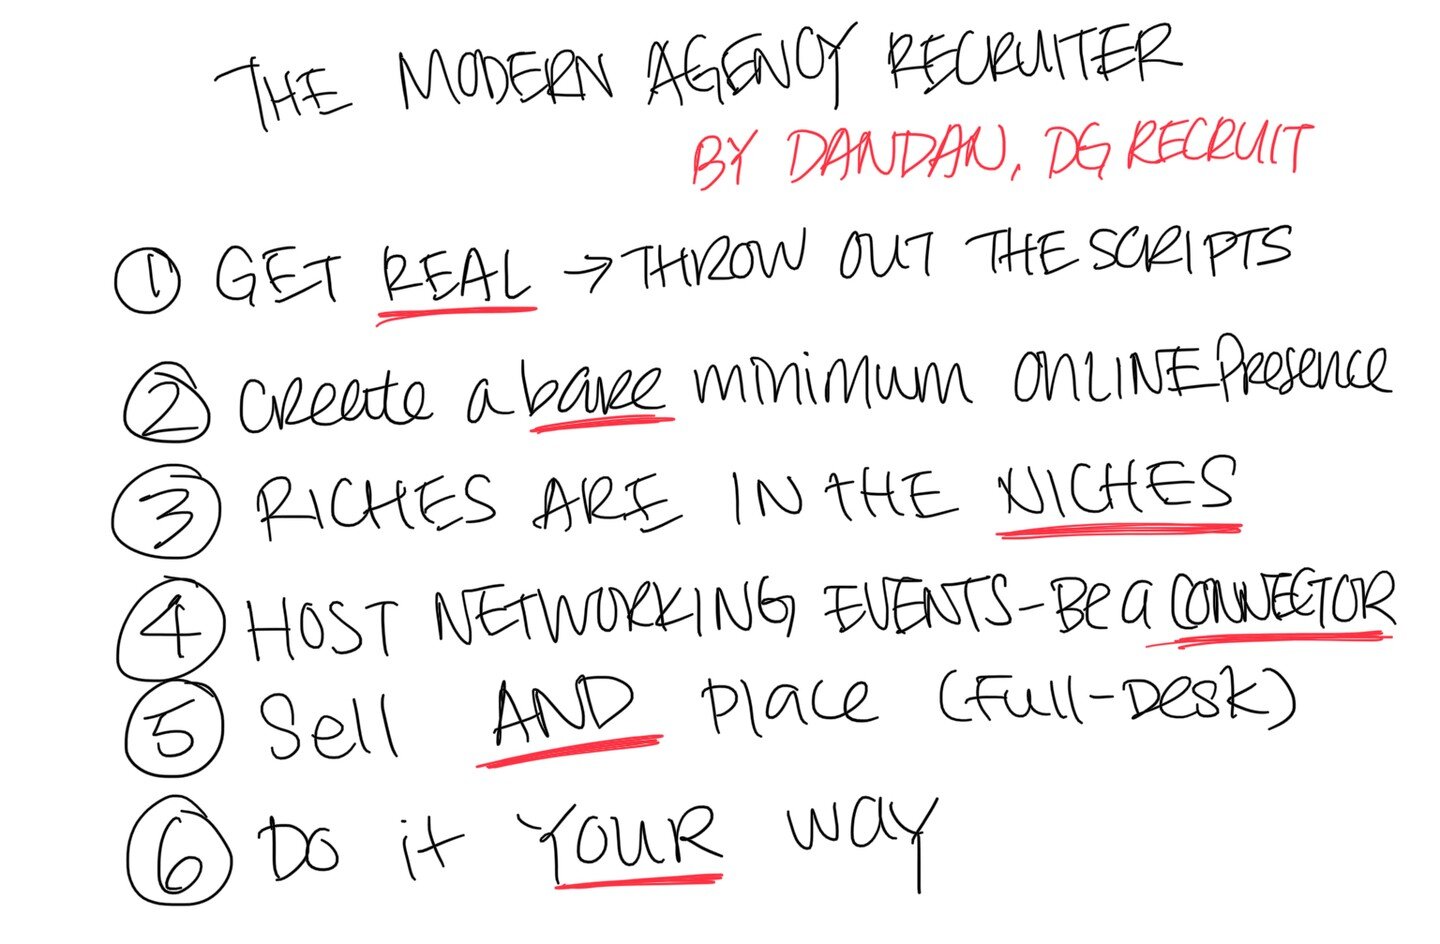 The MODERN agency recruiter has to level up because the game is changing.

If you don't get rid of some dinosaur approaches, you'll see your market share going to those who are adopting new techniques and strategies to get ahead and STAY ahead.

Tune